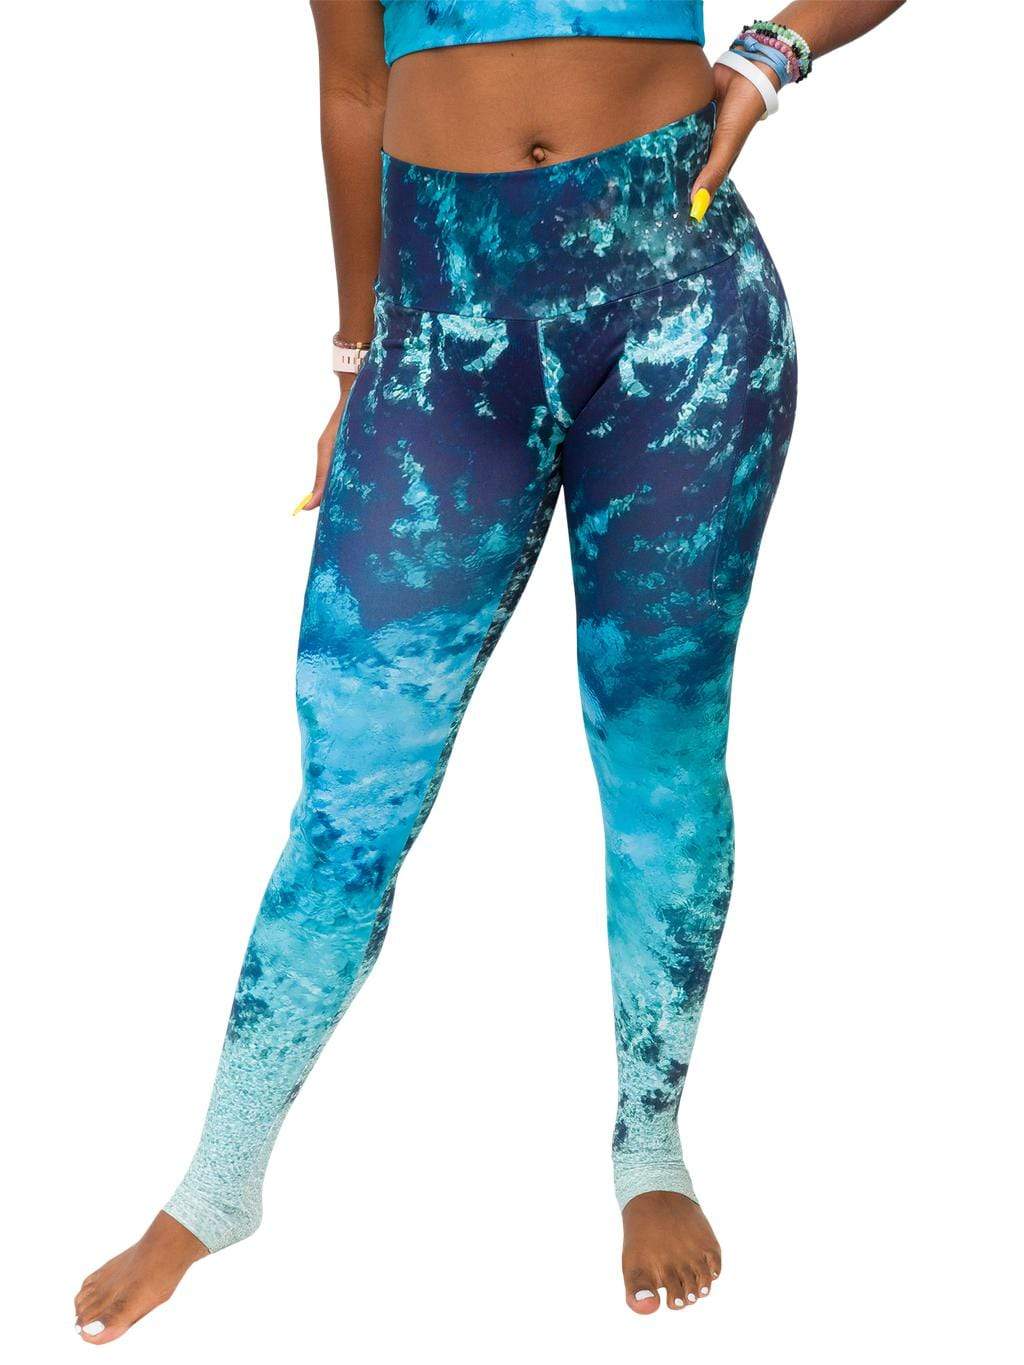 A fav!!! Sierra Legging try on! These will be $17 off + 5% off